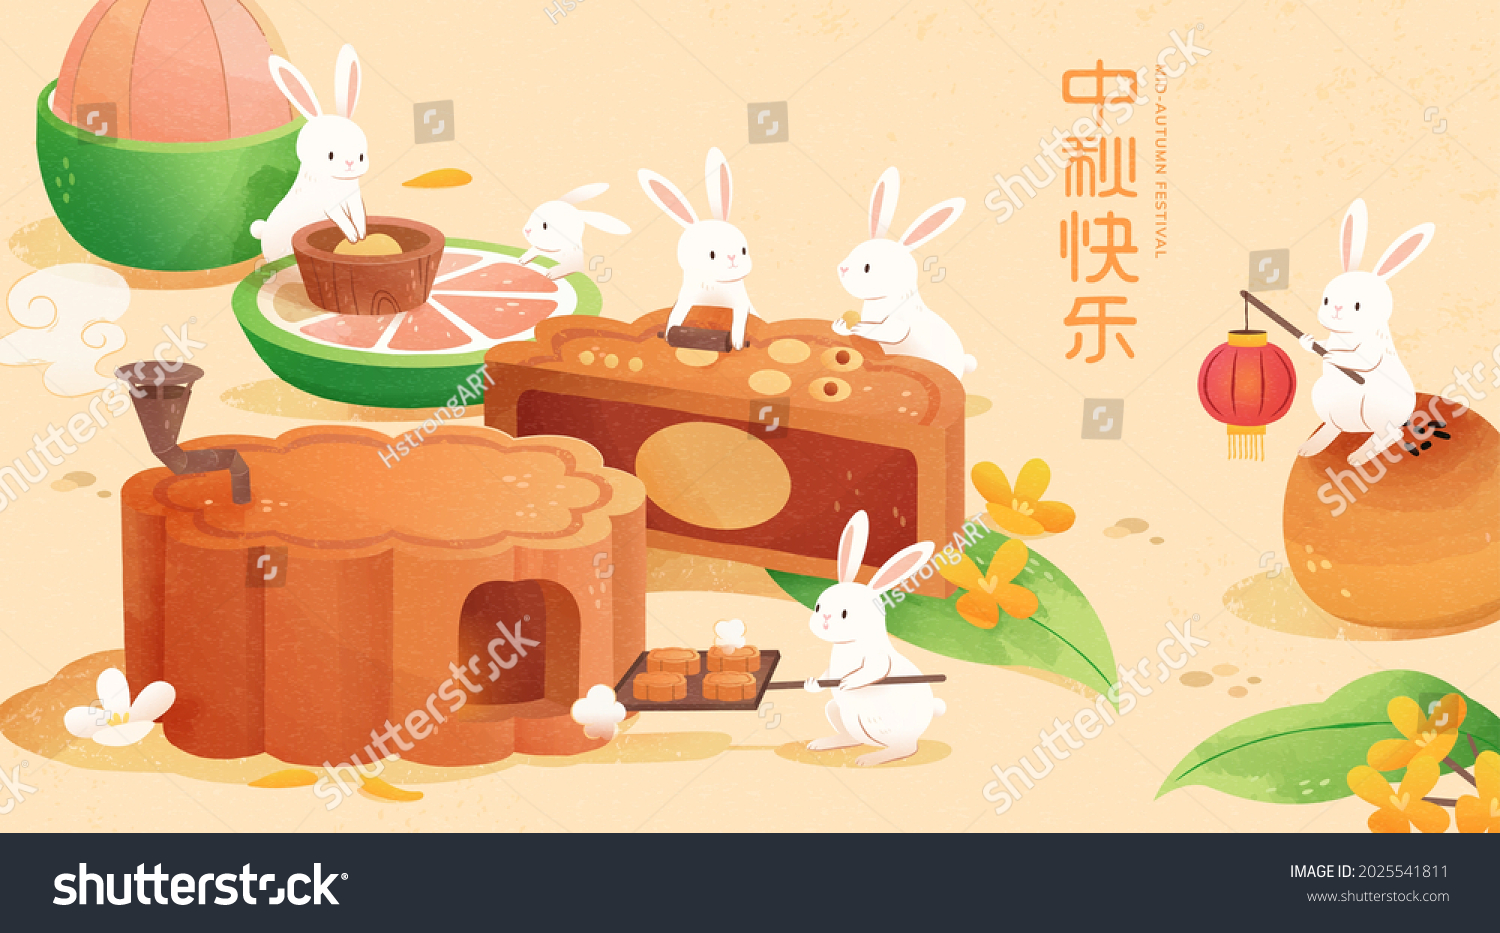 stock-vector-asian-mooncake-bakery-theme-banner-cute-white-rabbits-making-tasty-moon-cakes-together-to-2025541811